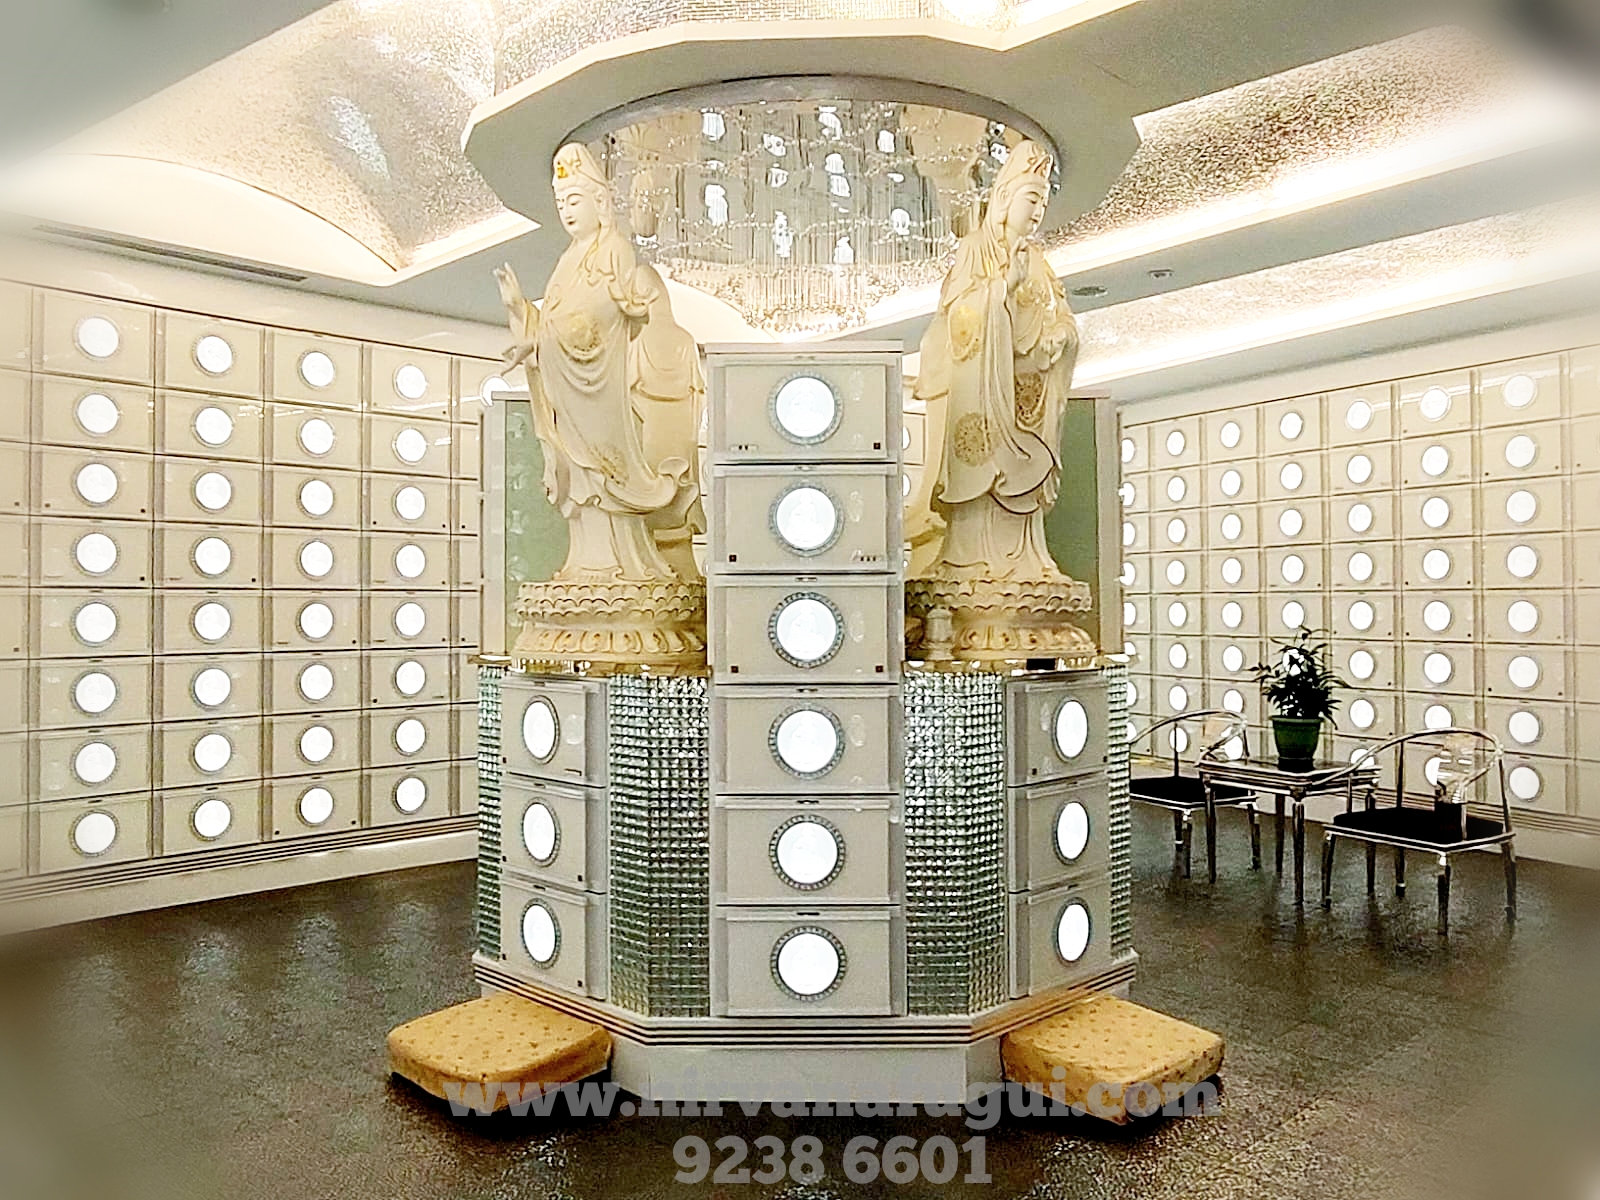 This columbarium has guan-yin statue. The design is clean and white.